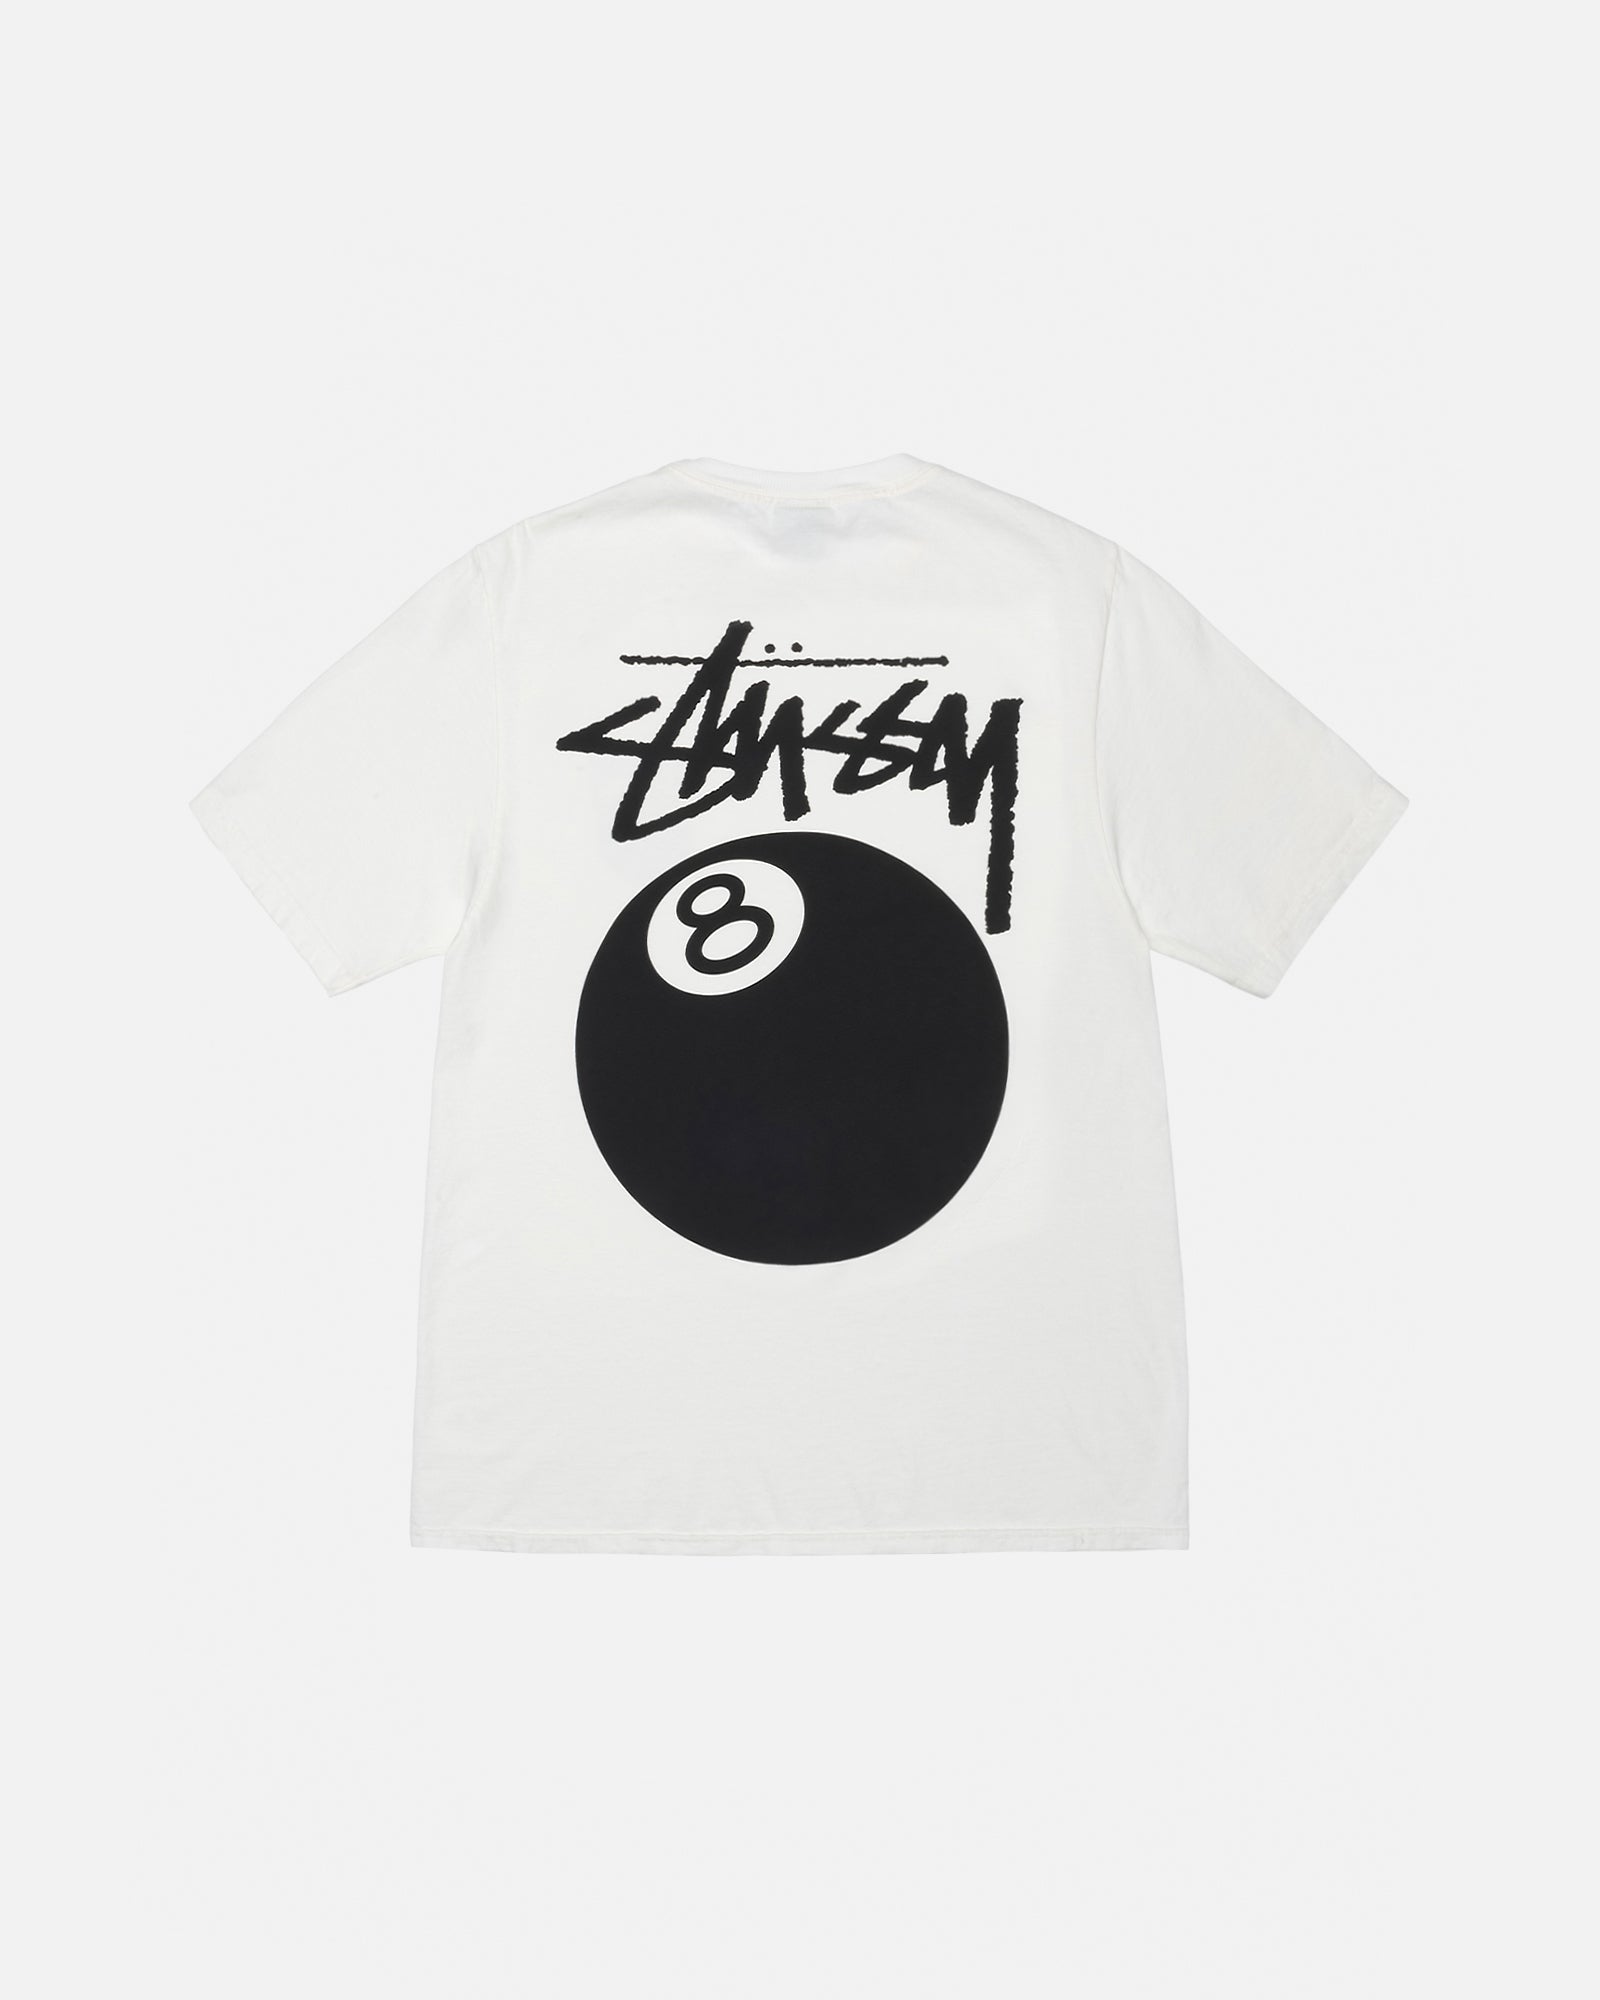 STÜSSY 8 BALL TEE PIGMENT DYED NATURAL SHORTSLEEVE